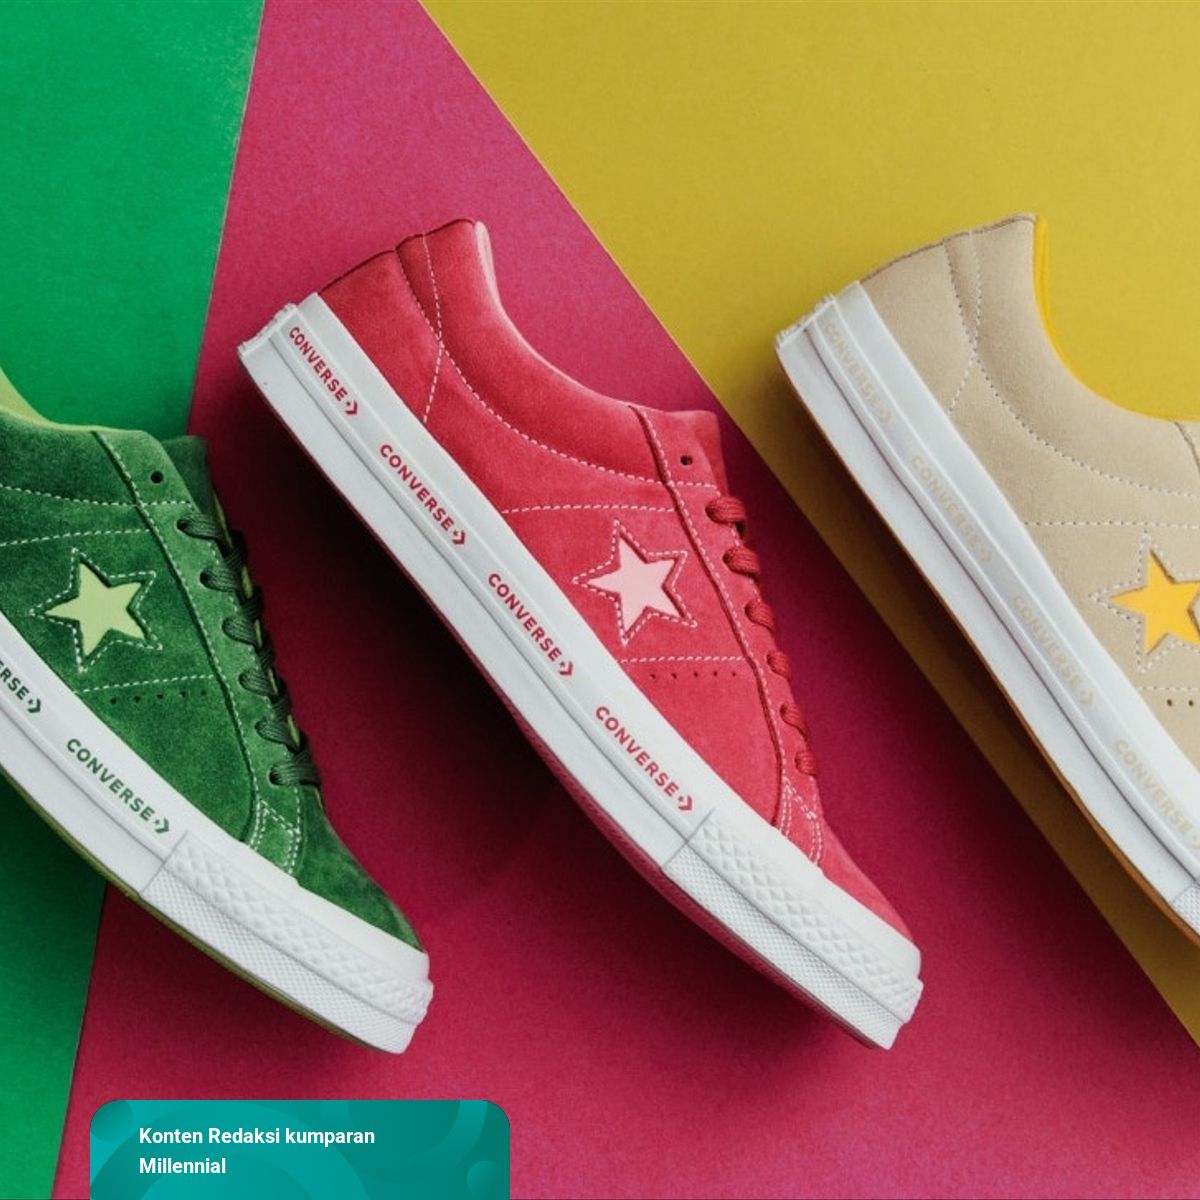 converse one star kw